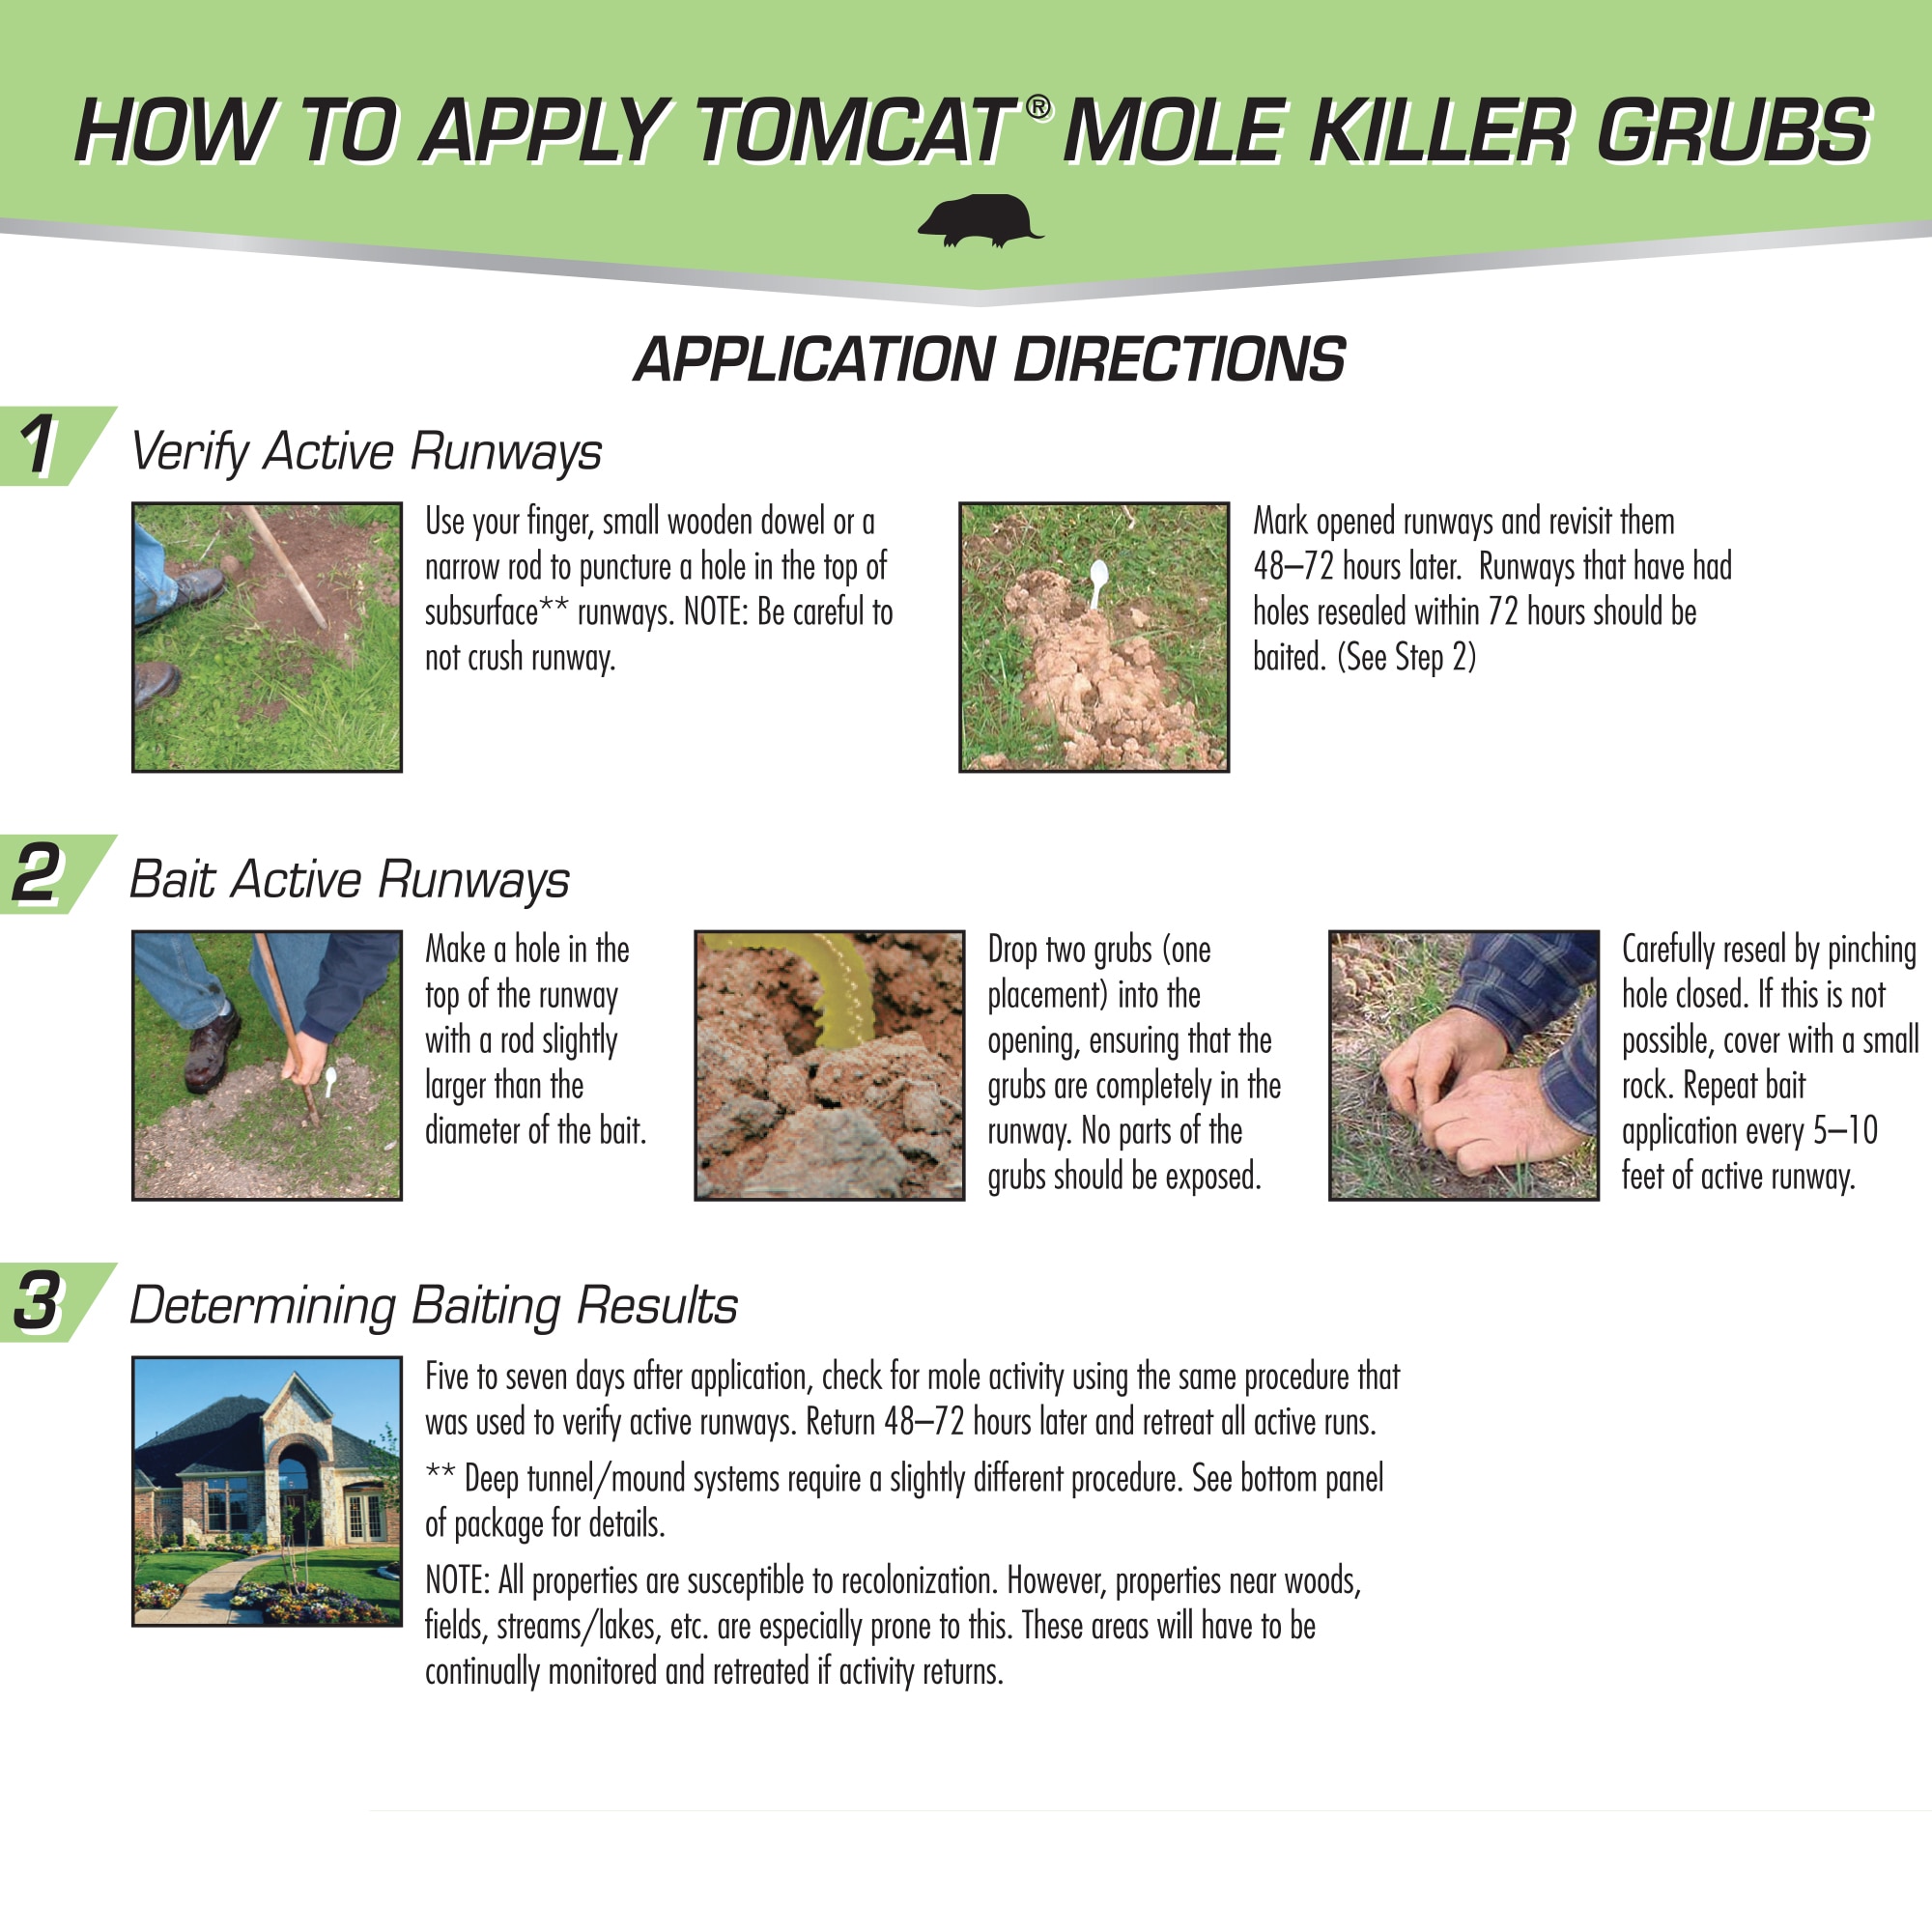 Tomcat Mole Killer, Mimics Natural Food Source, Poison Kills in a Single  Feeding, 10 Worms For Rodents